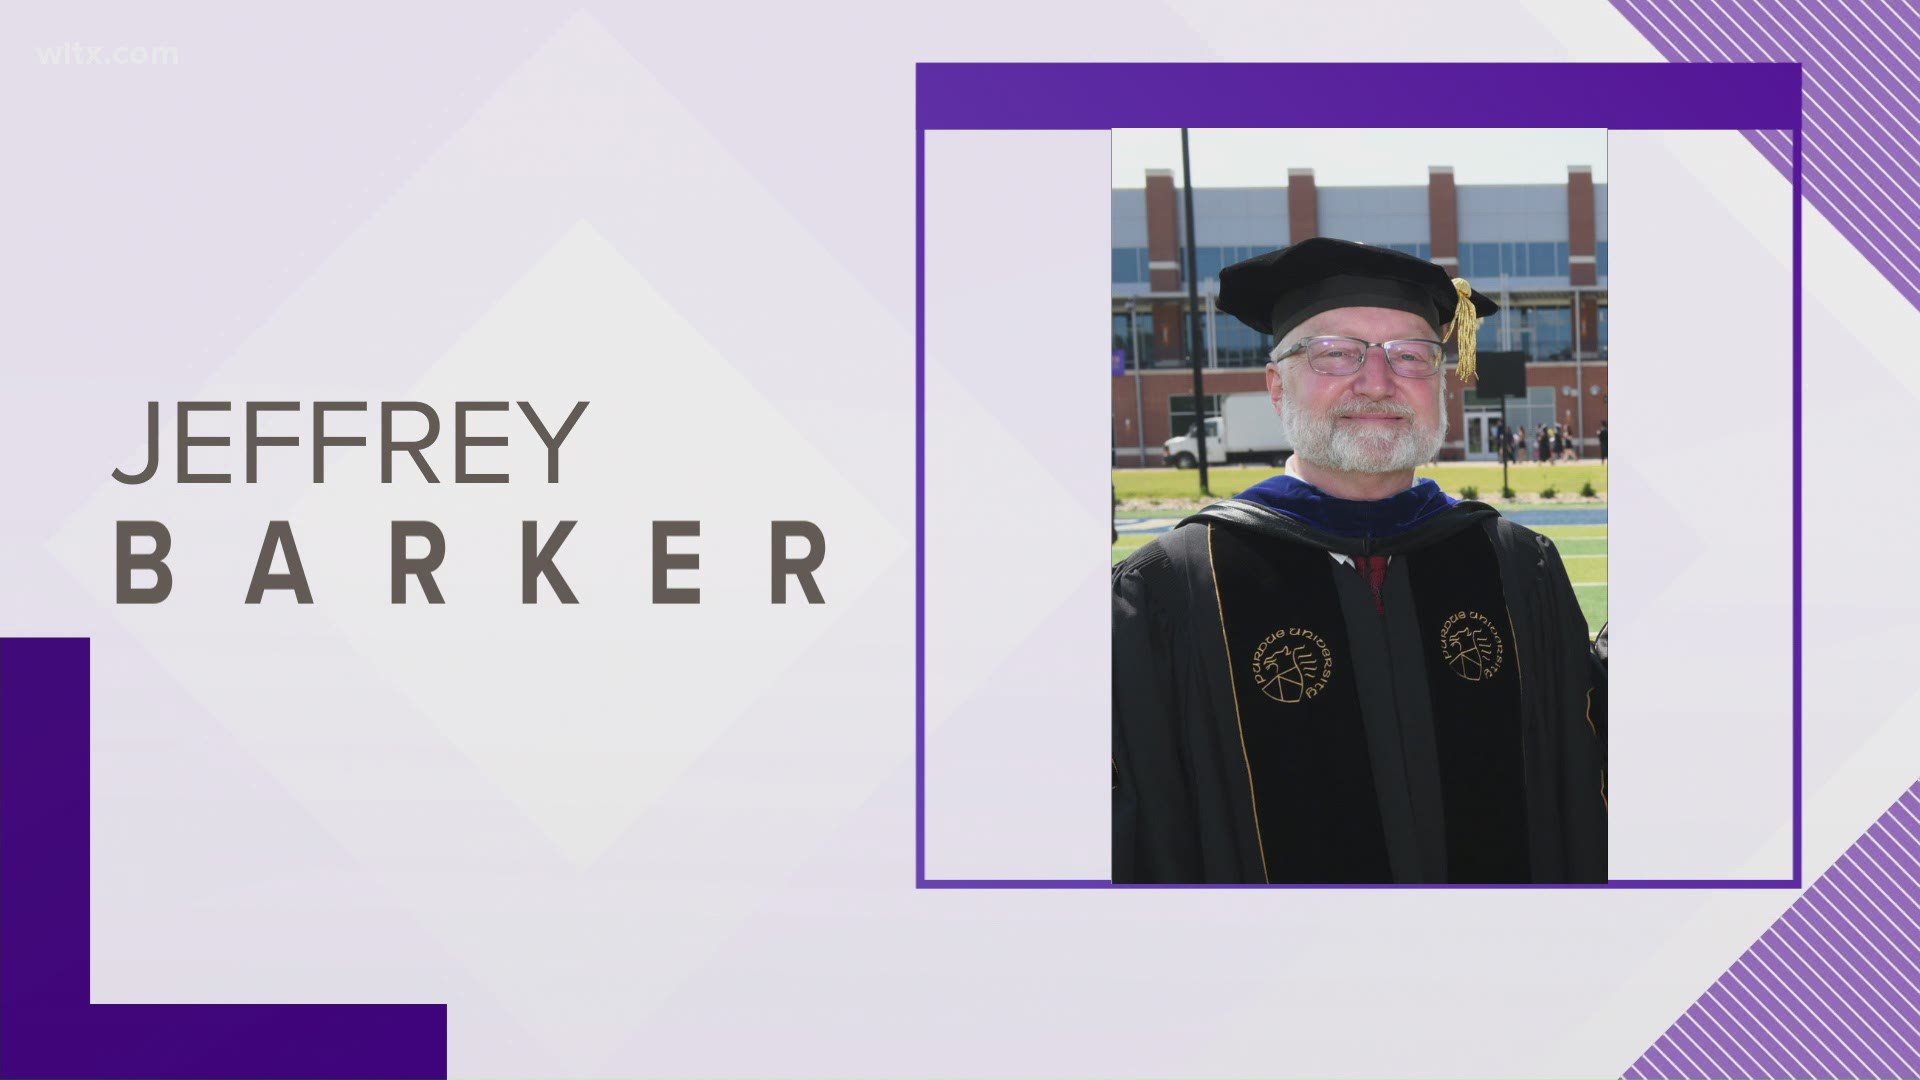 President of Converse University Jeffrey Barker was killed in a bicycle accident Wednesday night.